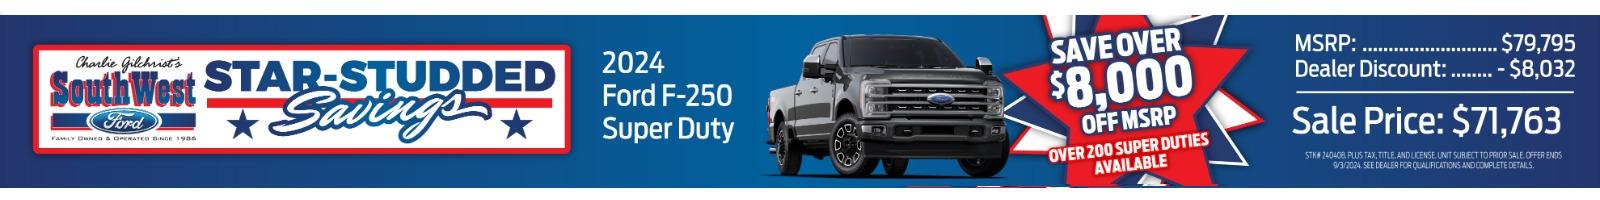 2024 Ford F-250 Banner